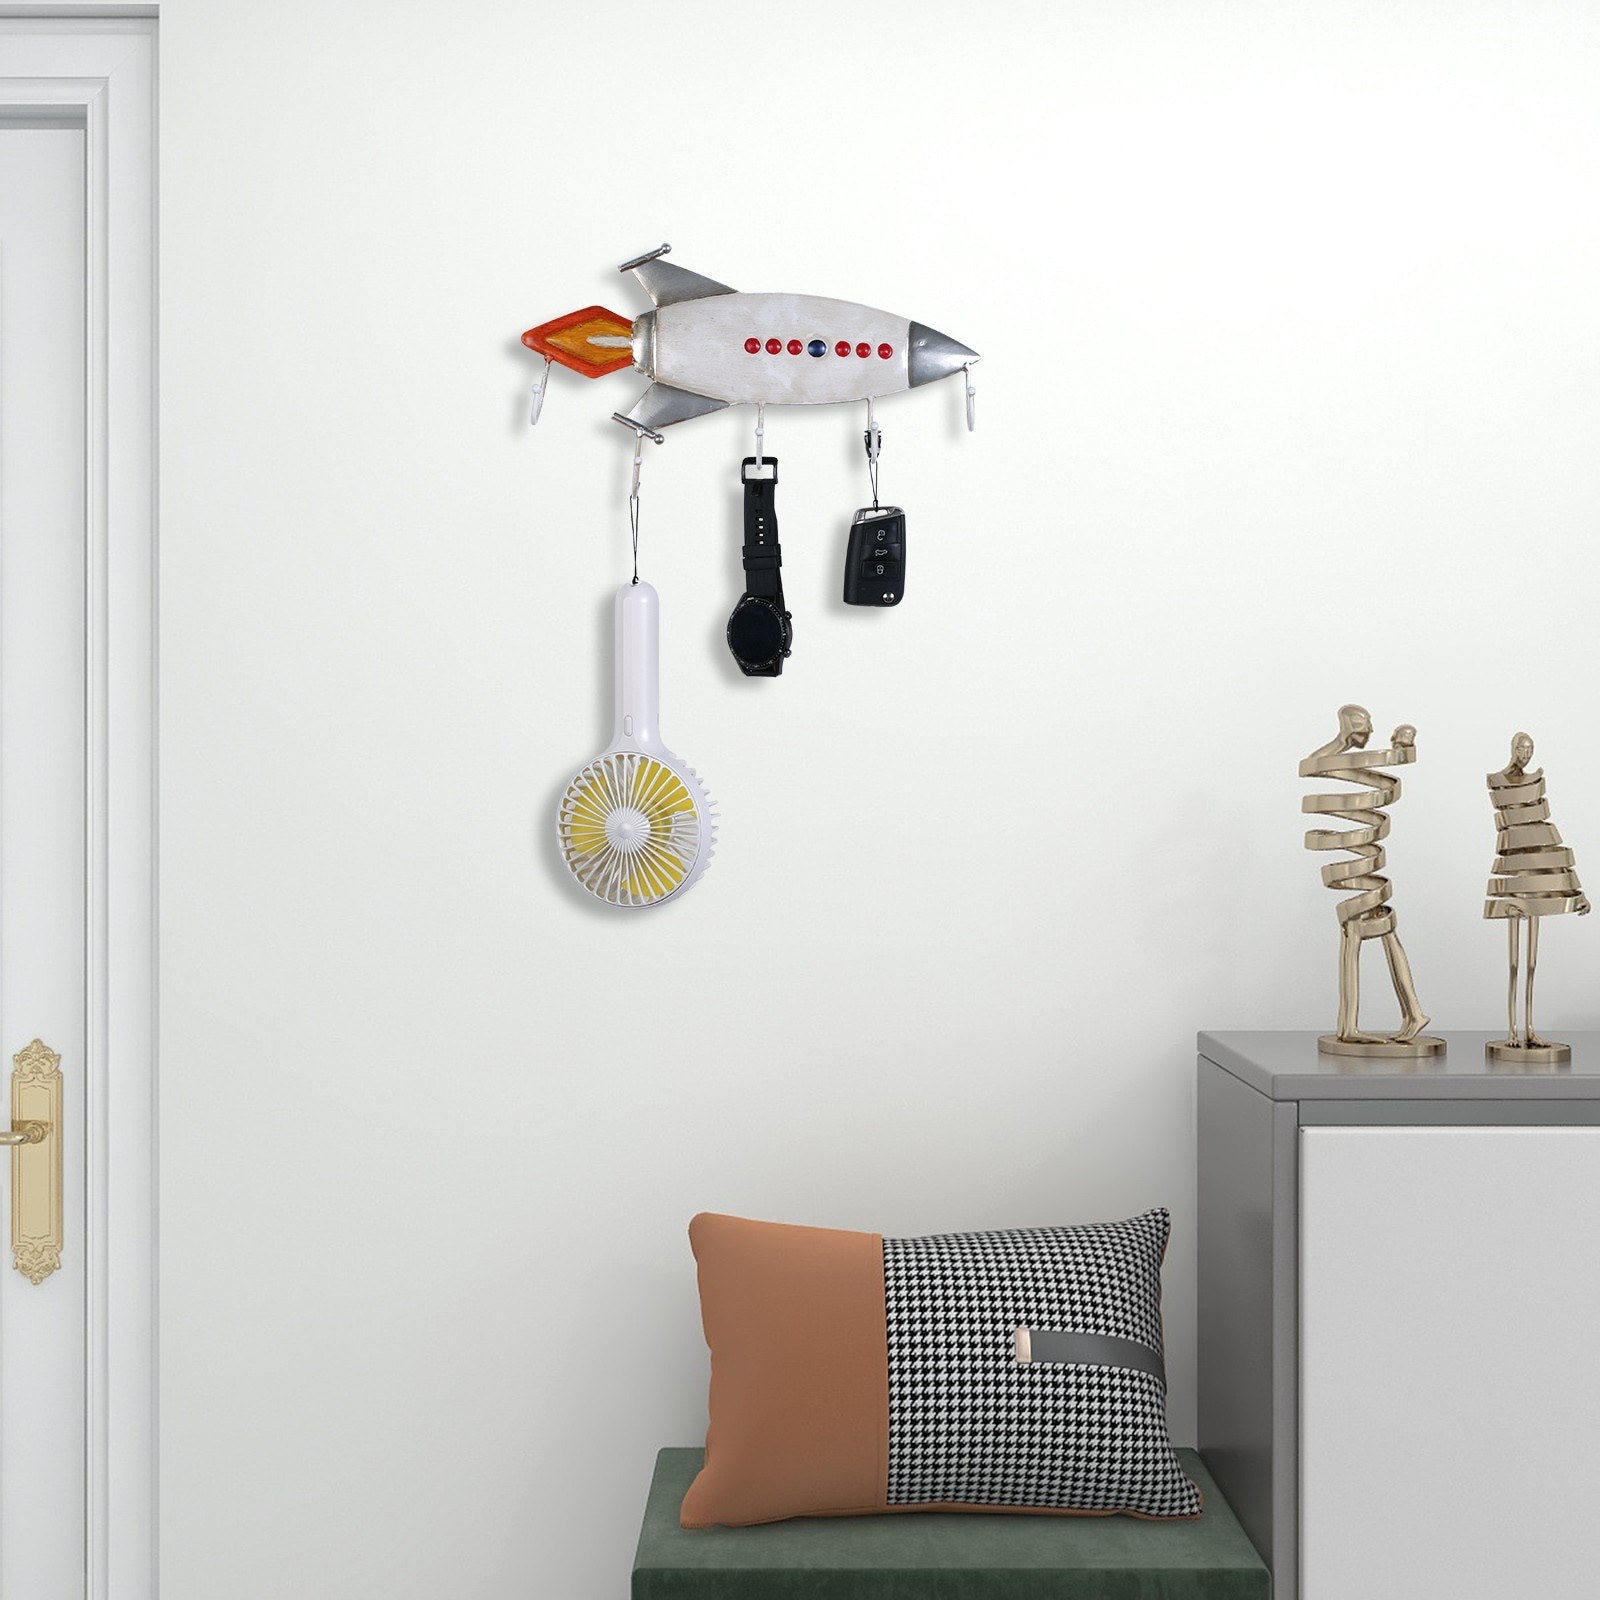 Spaceship wall hook is the decorative item to your home